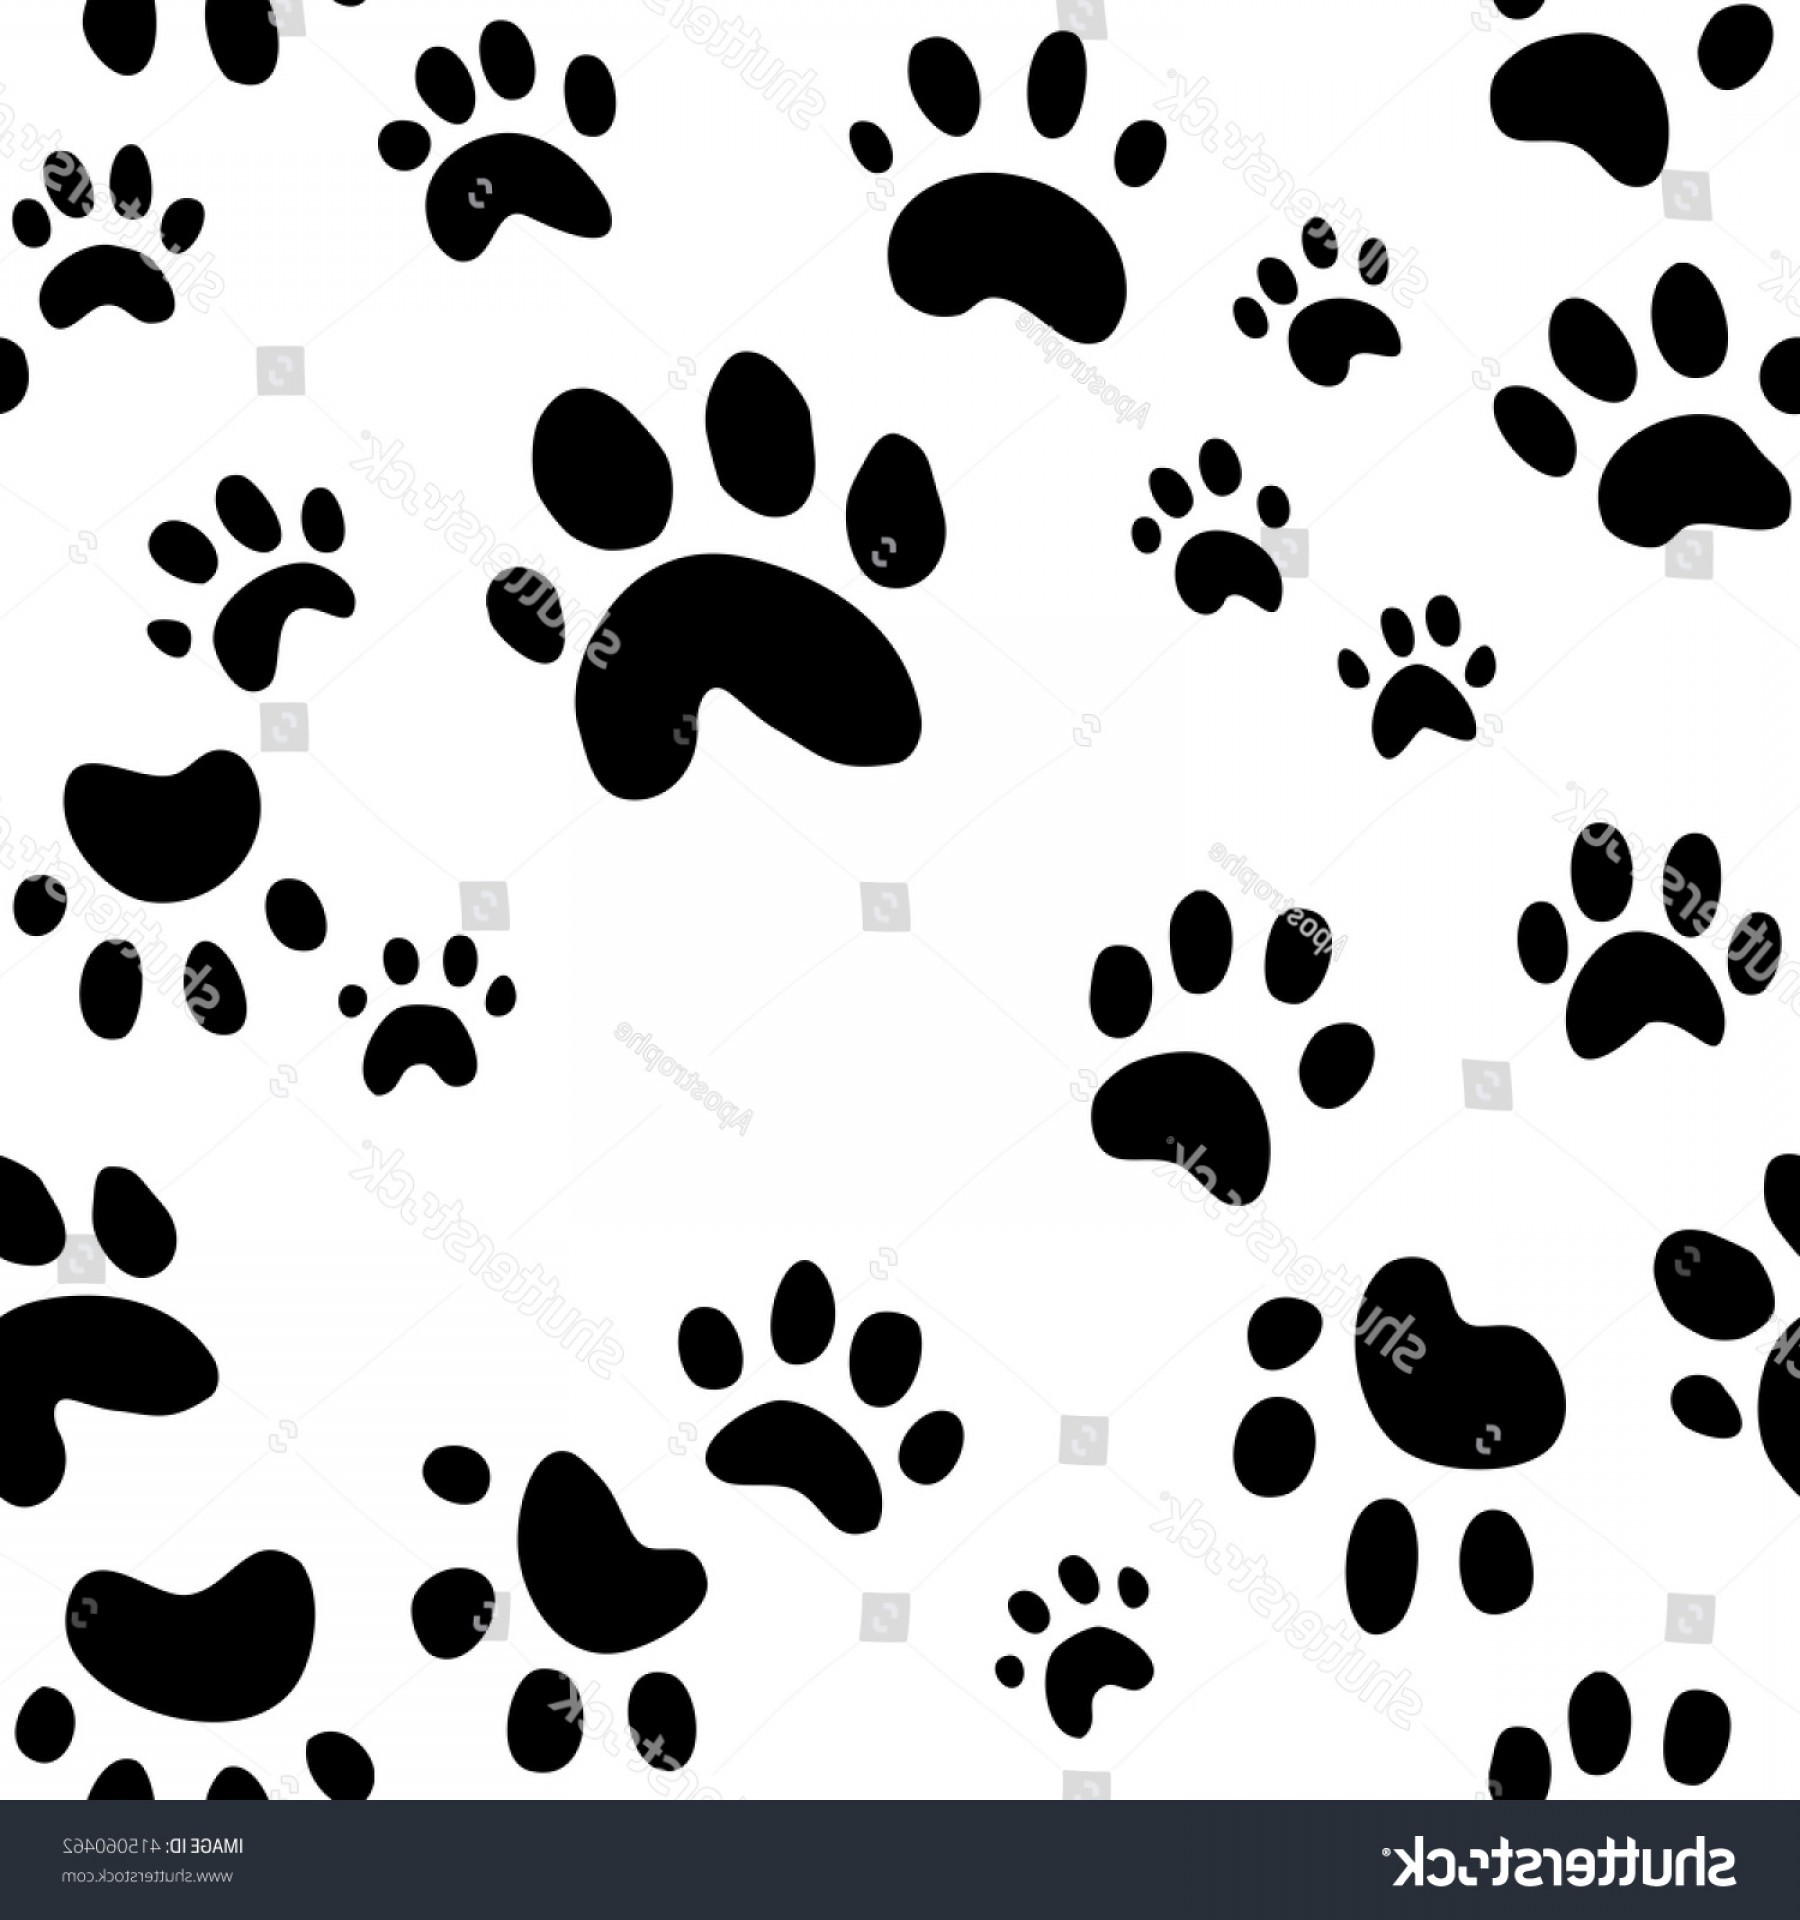 1800x1920 Mean Dog Paw Vector: Dog Paw Print Seamless Wallpaper Background